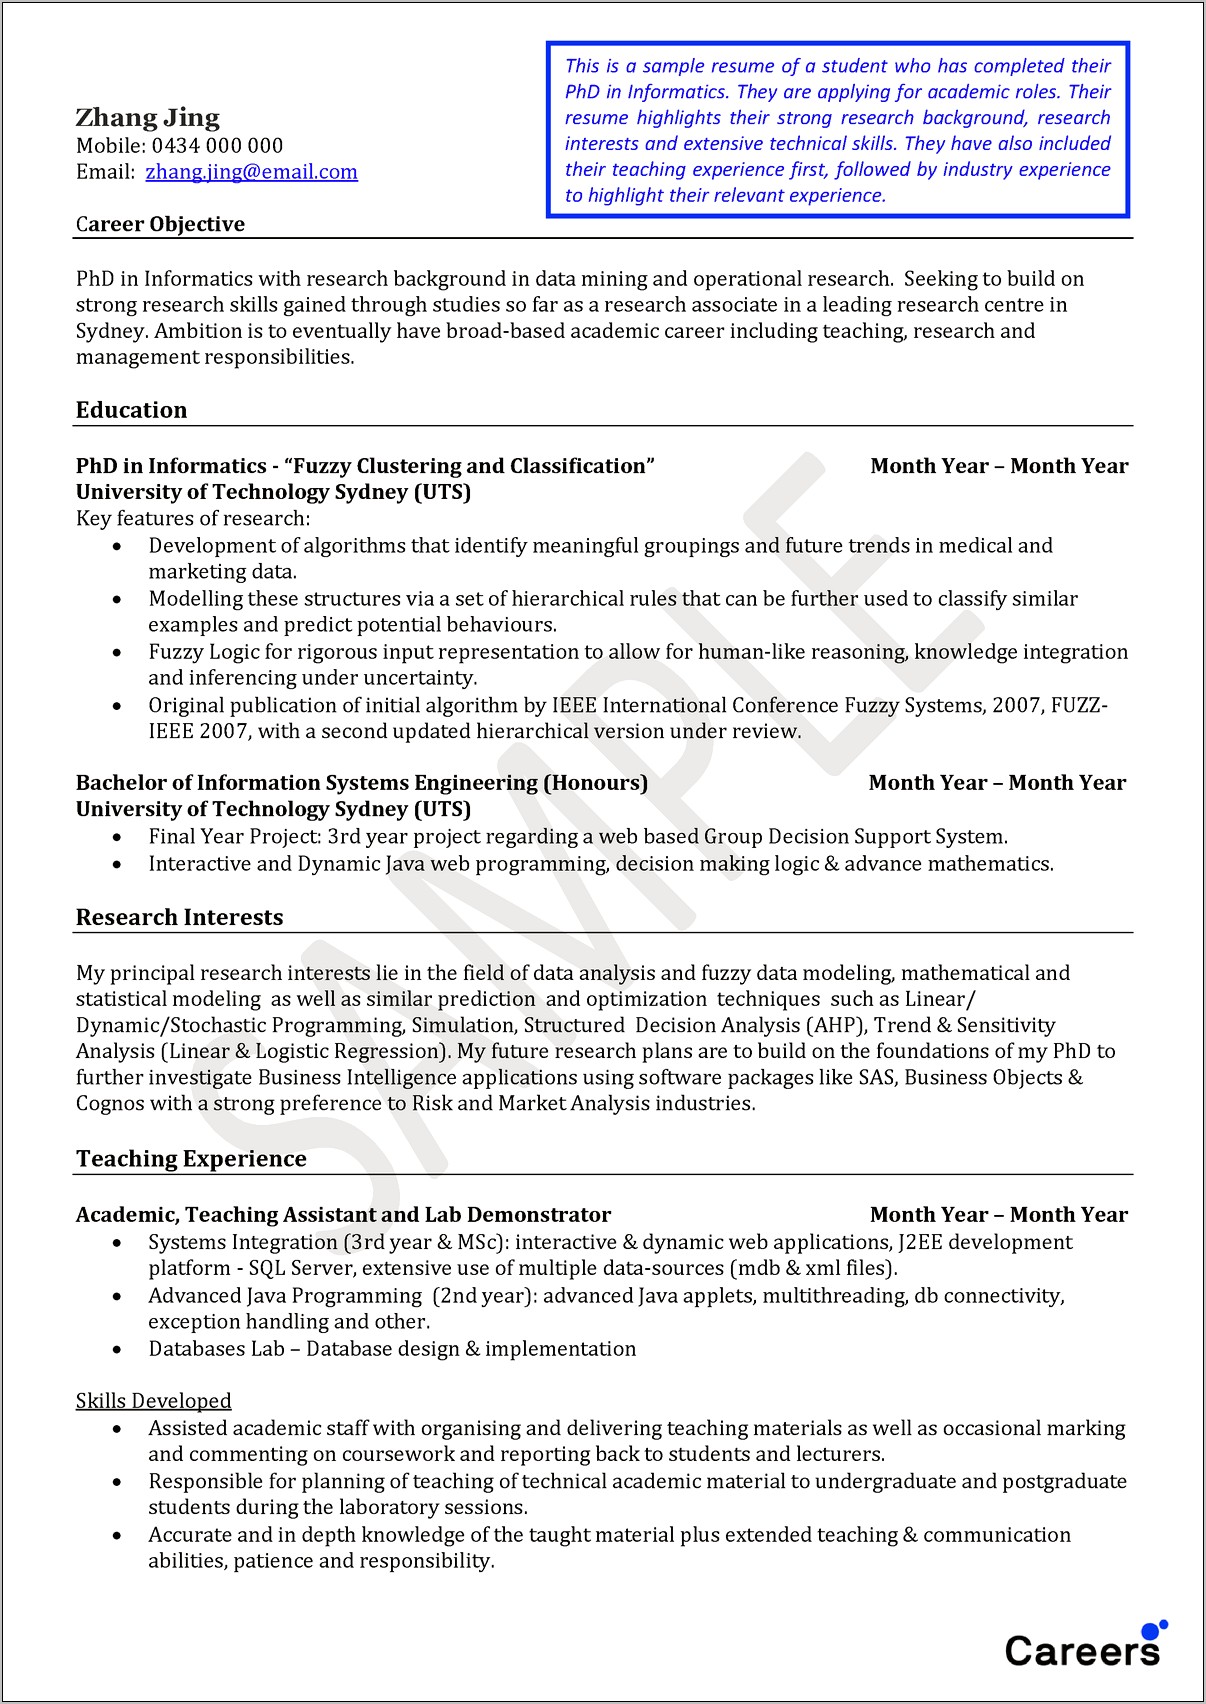 Academic Research Experience Vs Industry Experience Resume